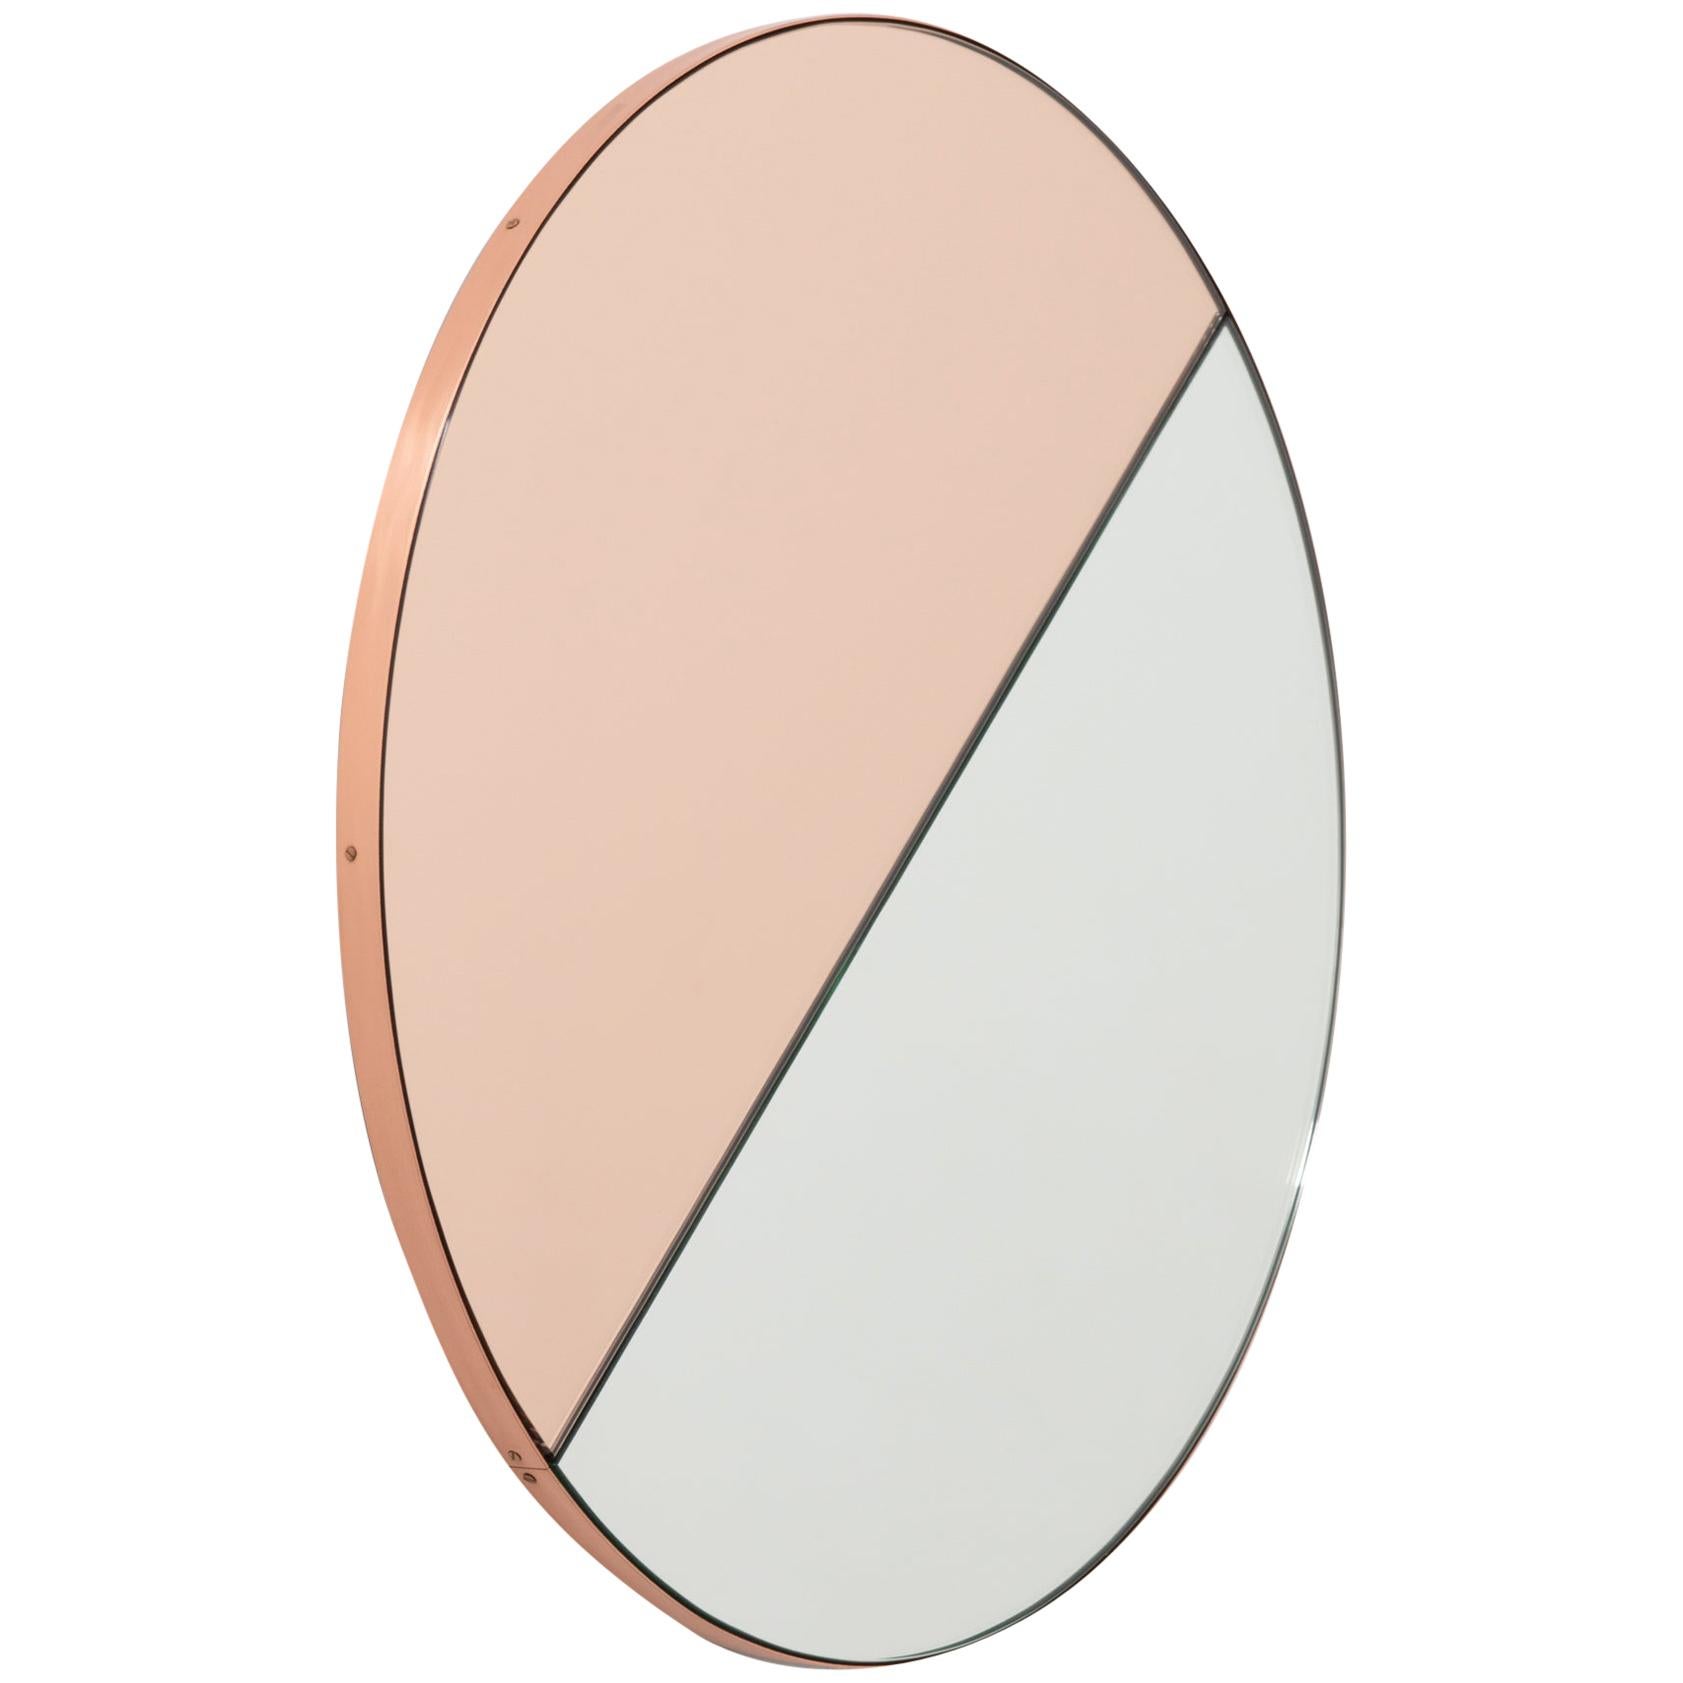 Orbis Dualis Mixed Rose Gold and Silver Round Mirror with Copper Frame, Medium For Sale